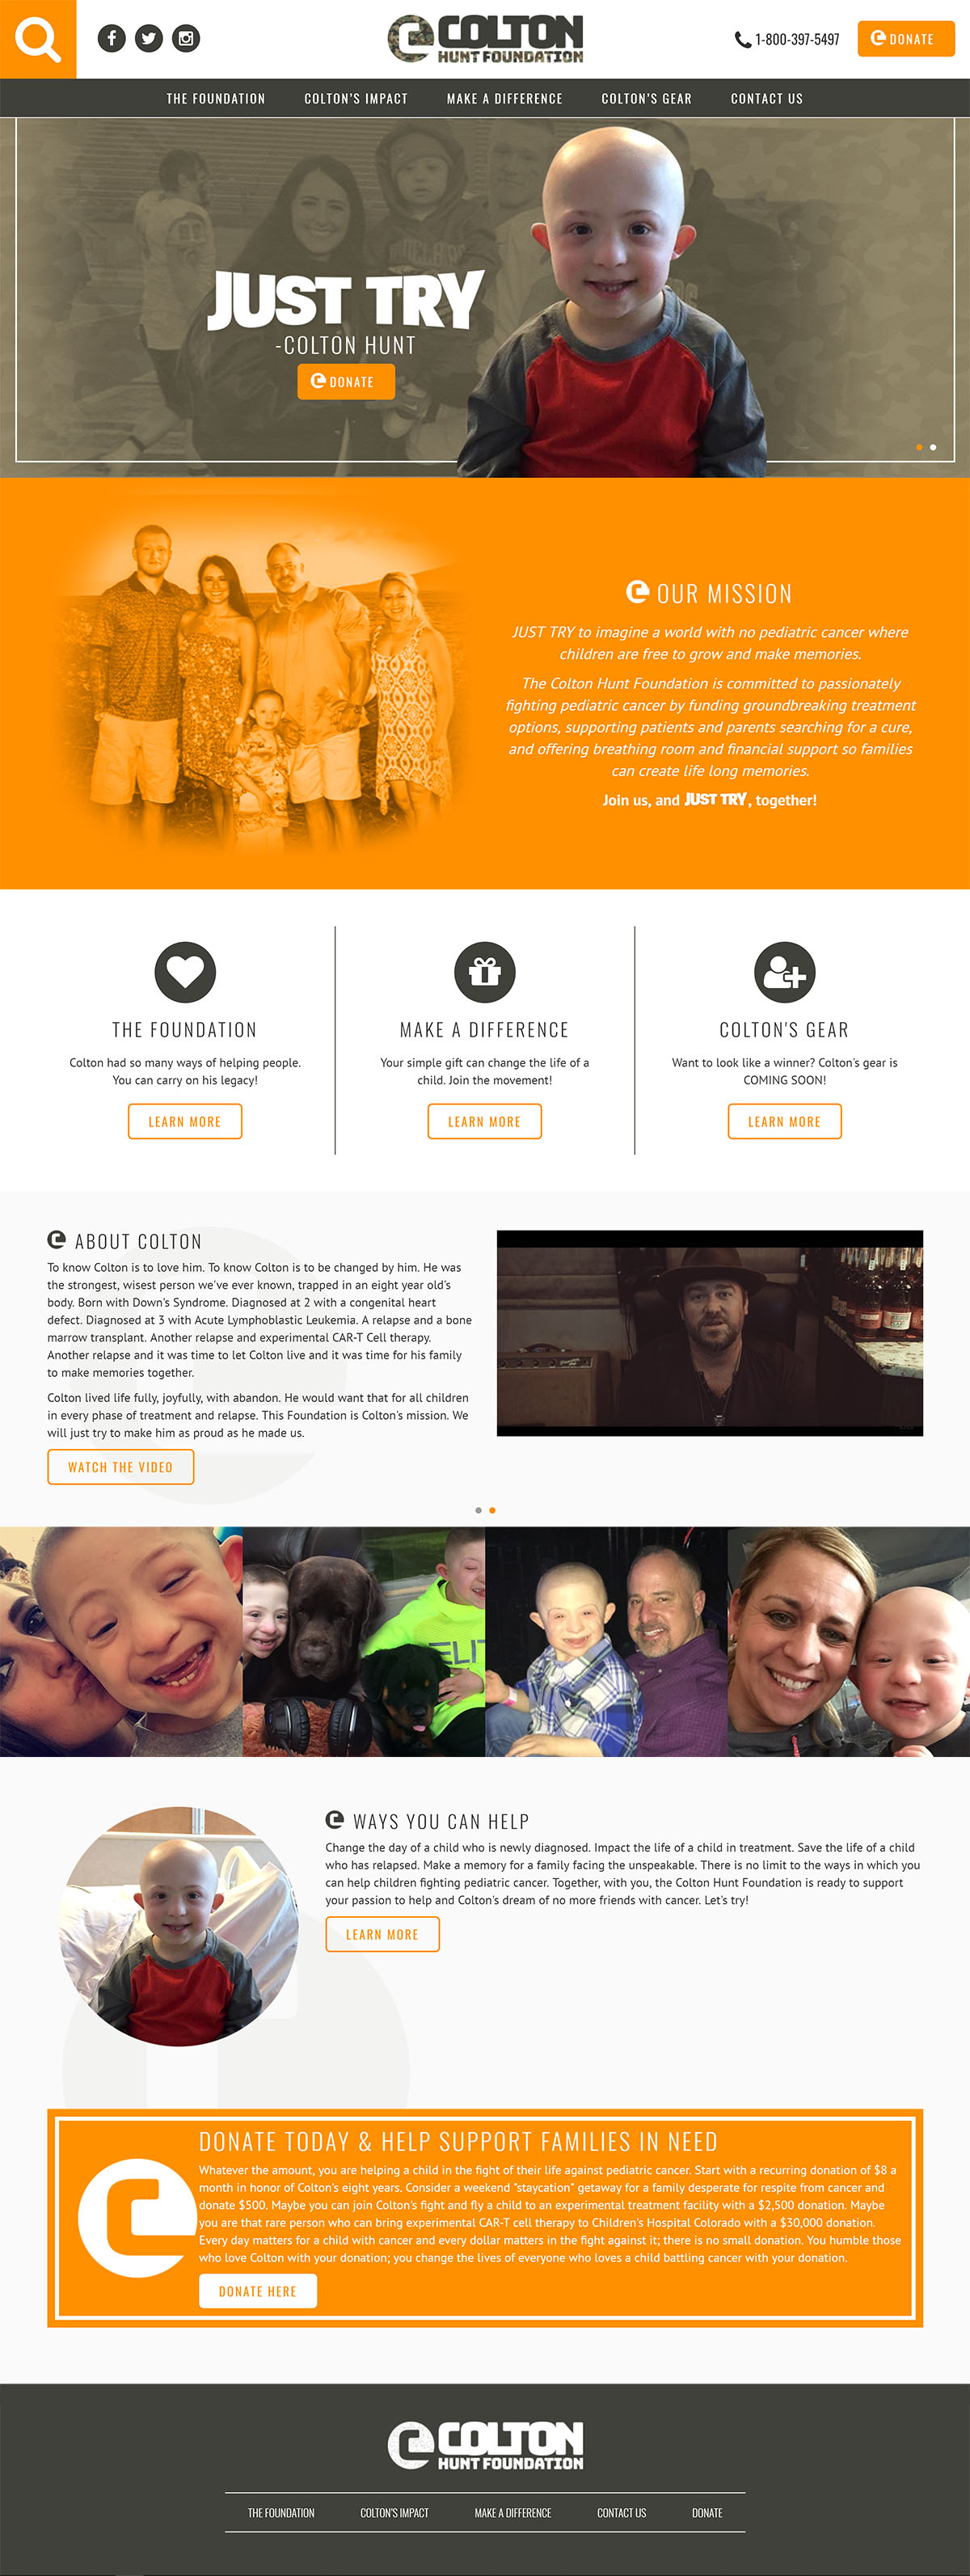 Colton Hunt Foundation Home Page